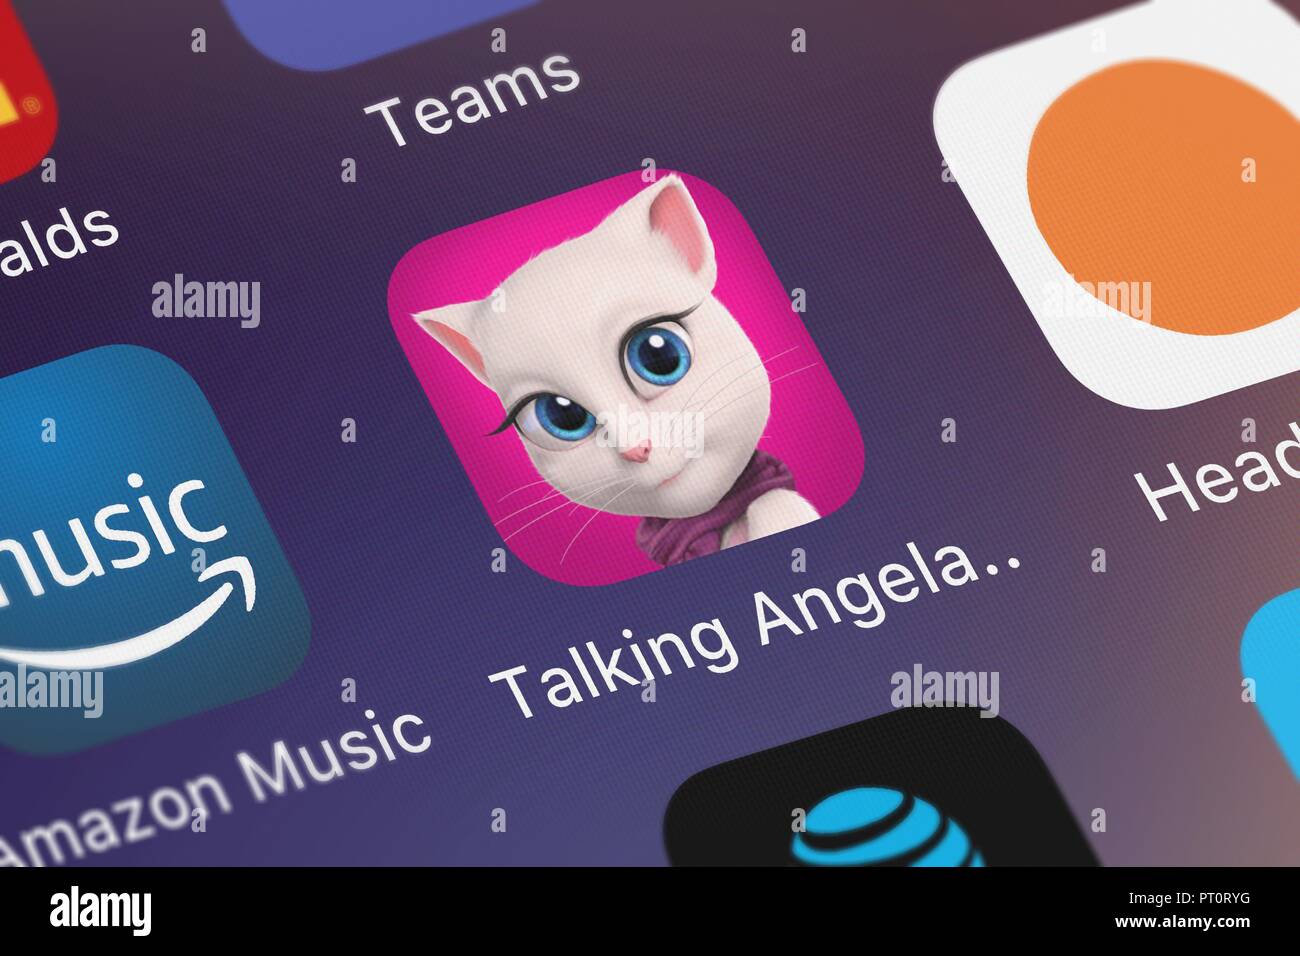 London, United Kingdom - October 05, 2018: Screenshot of Outfit7 Limited's mobile app Talking Angela for iPad. Stock Photo